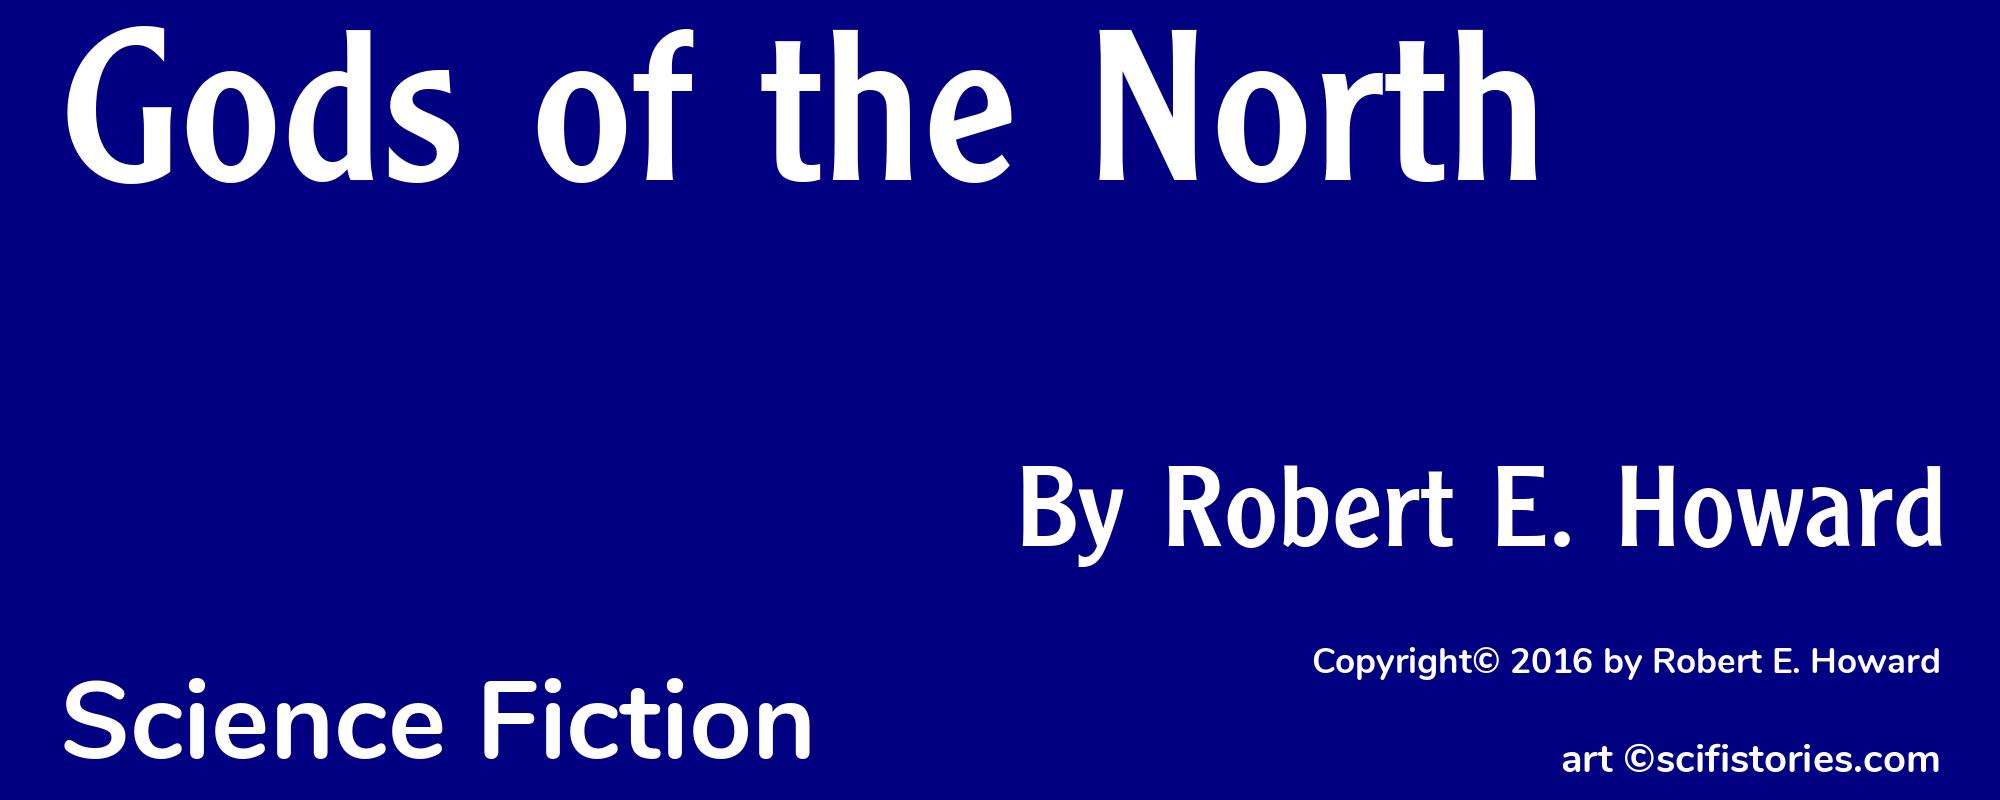 Gods of the North - Cover